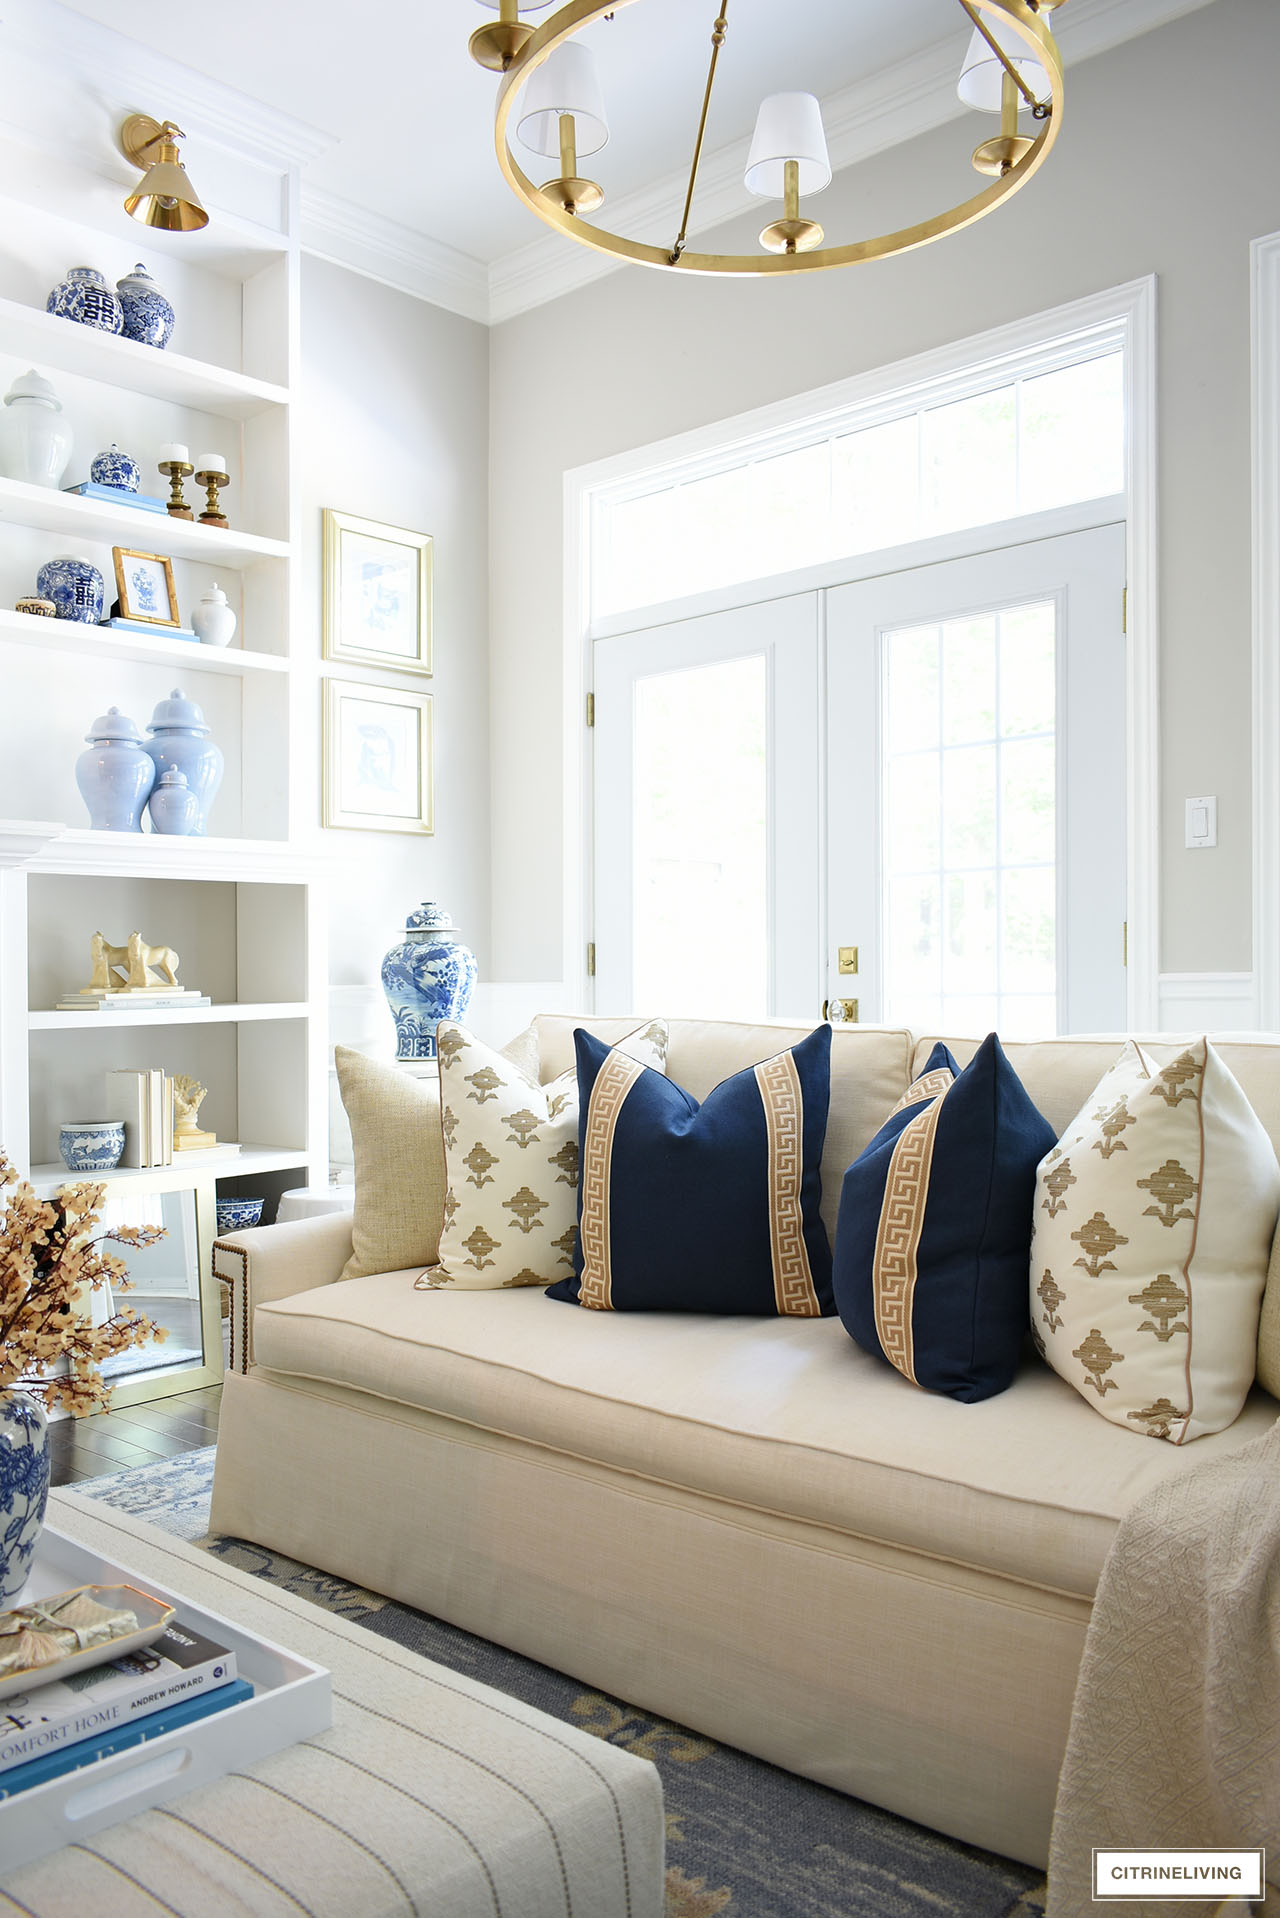 Pillows in navy, tan, white and gold styled for fall in this elegant and cozy living room.